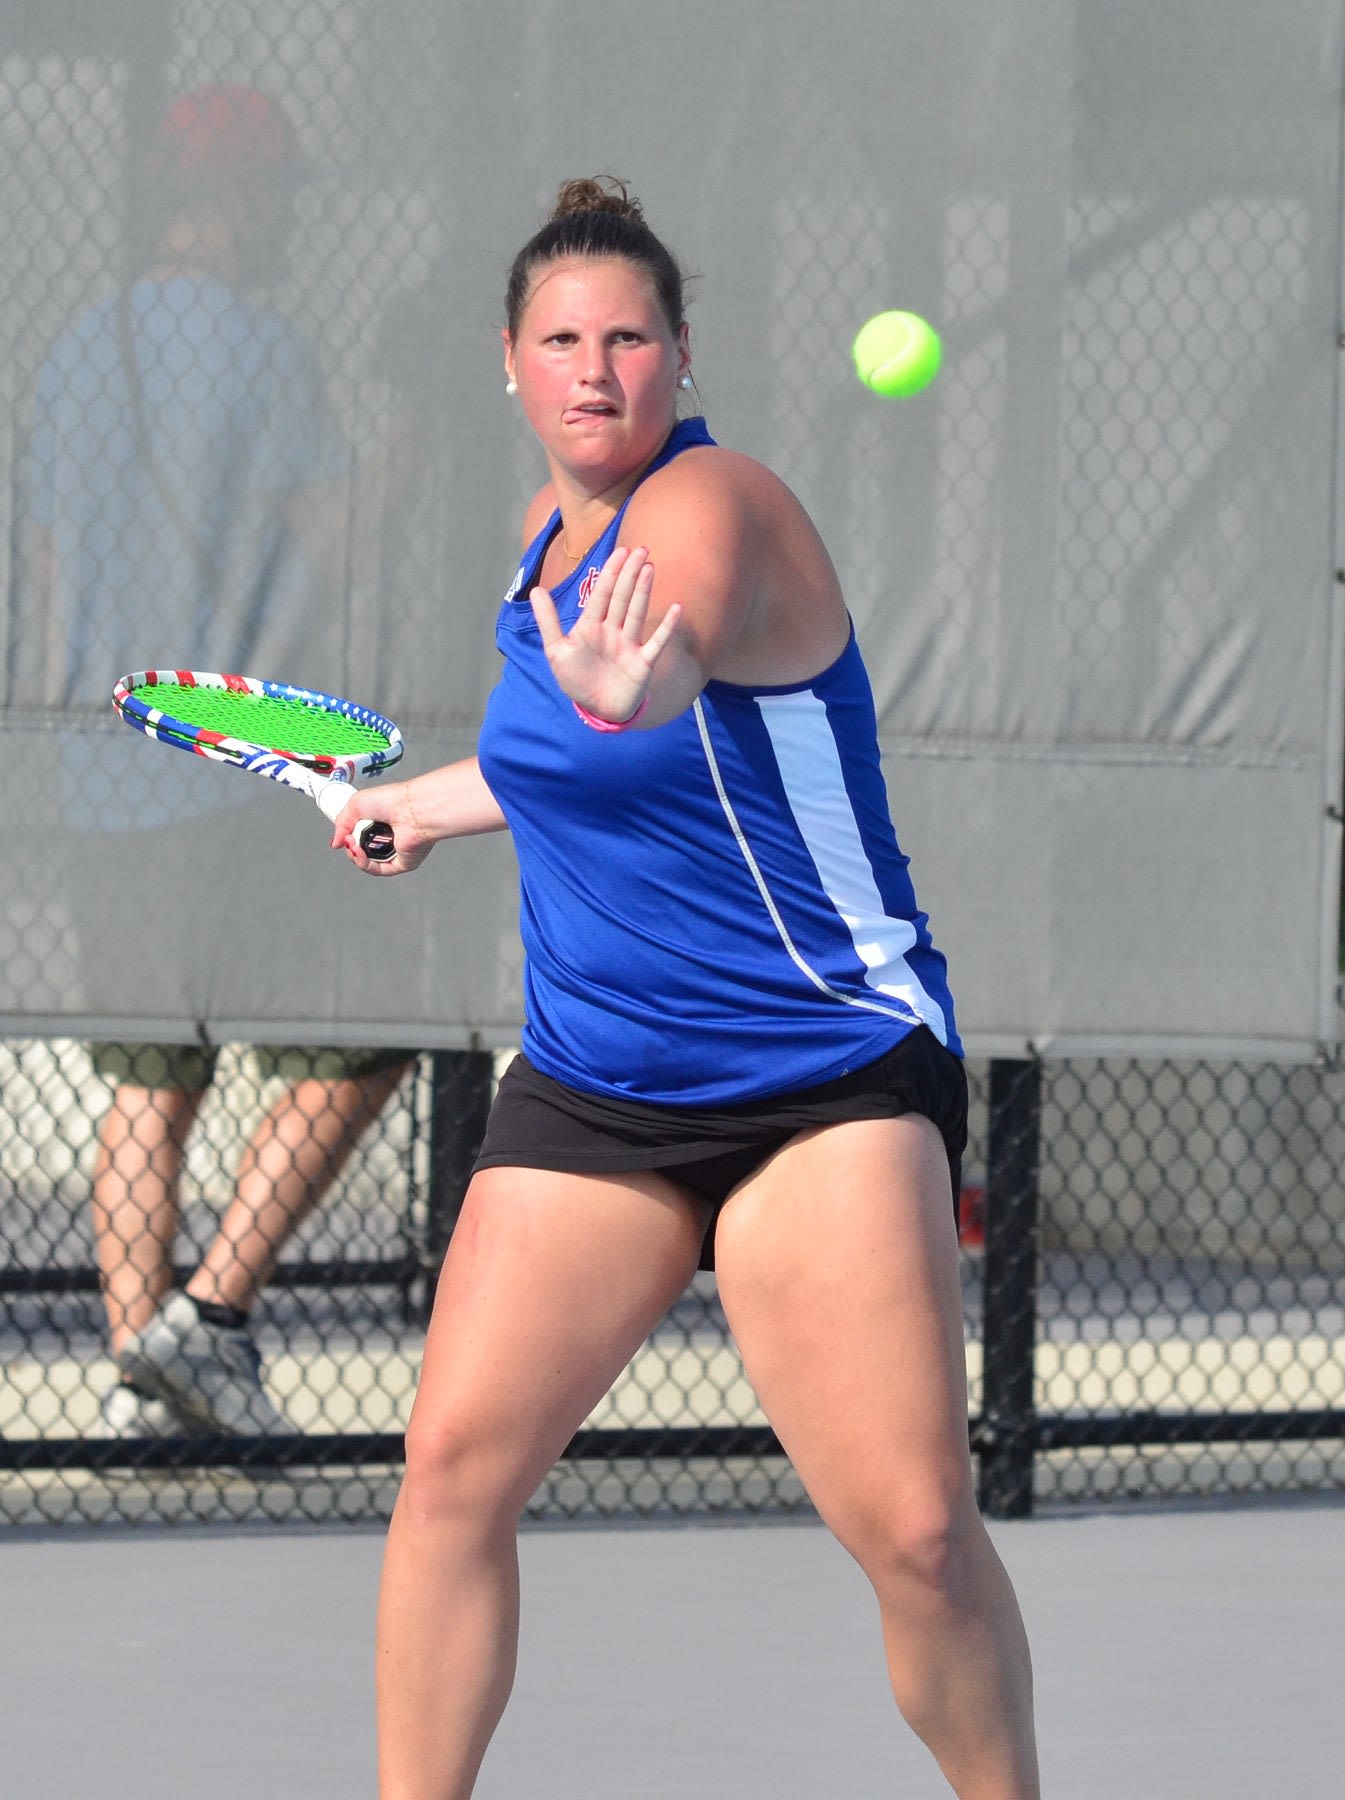 Bischoff, Smith add to Boyle girls’ string of regional doubles titles - The Advocate-Messenger